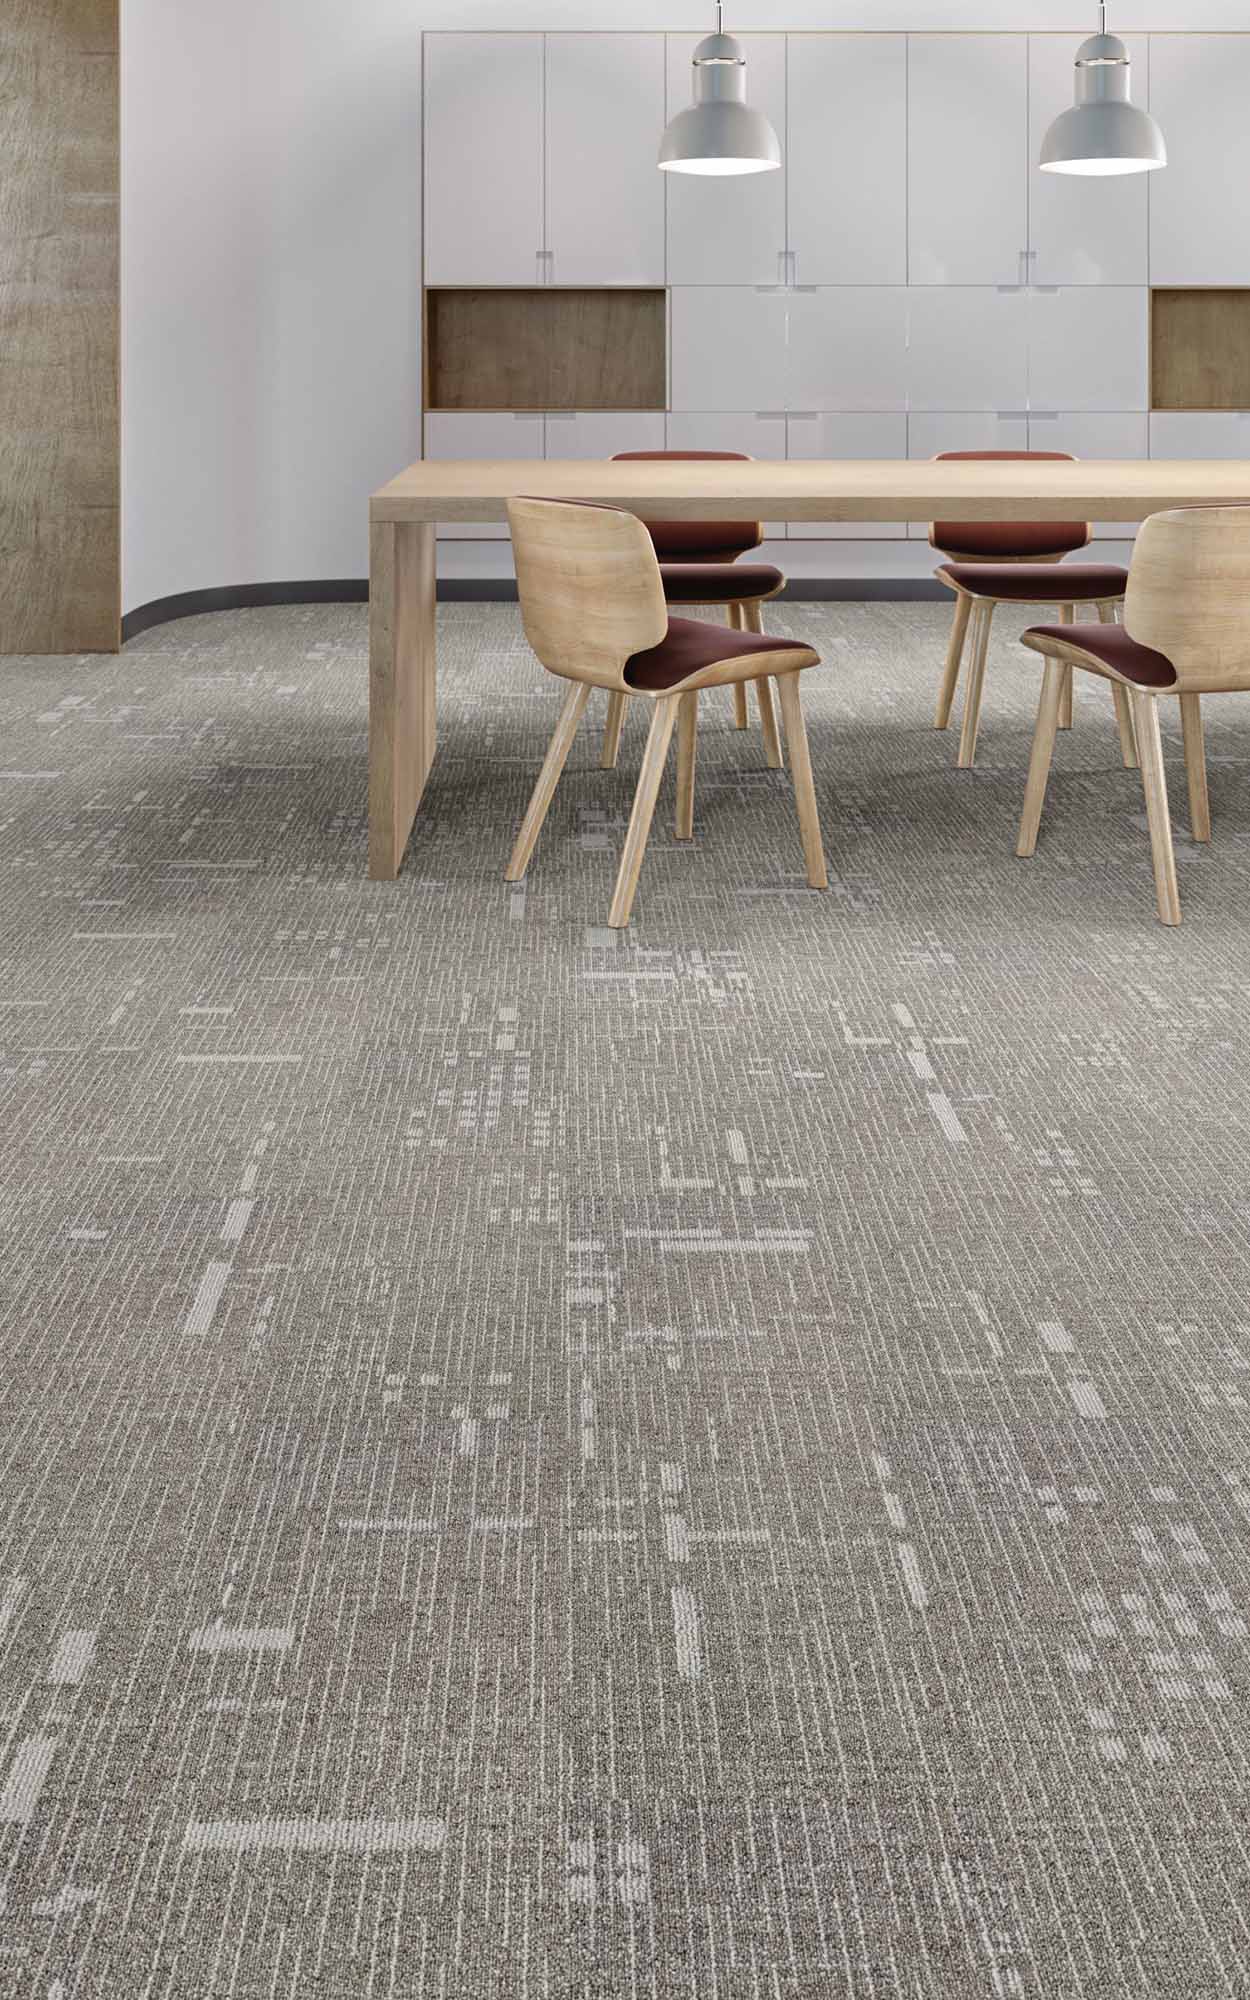 Mohawk Group Fractal Fluency carpet
designed with beyond carbon neutral, with patterns that relieve stress
